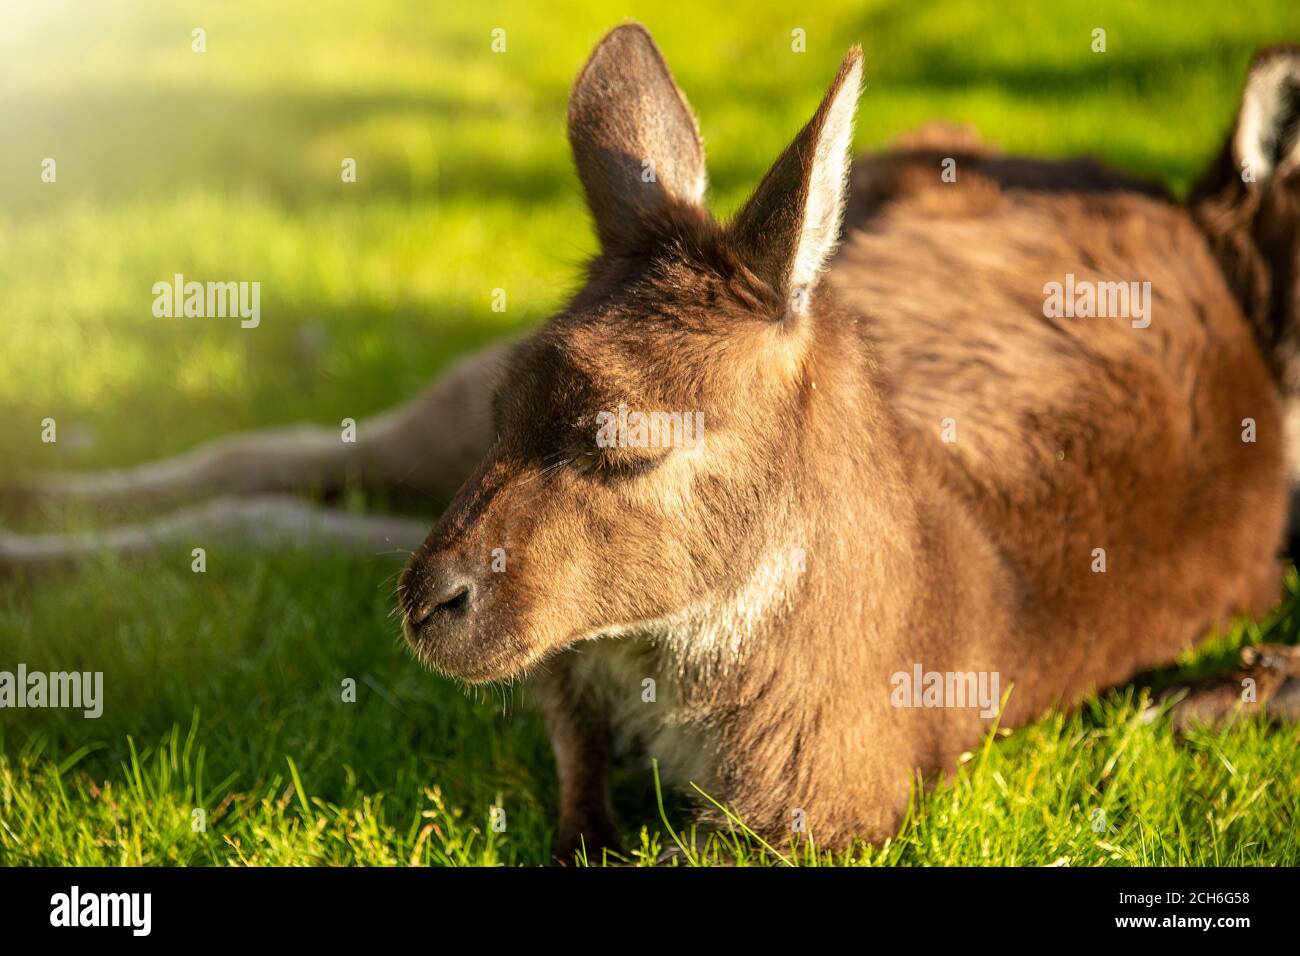 Relaxed kangaroo lying on the grass at sunset Stock Photo